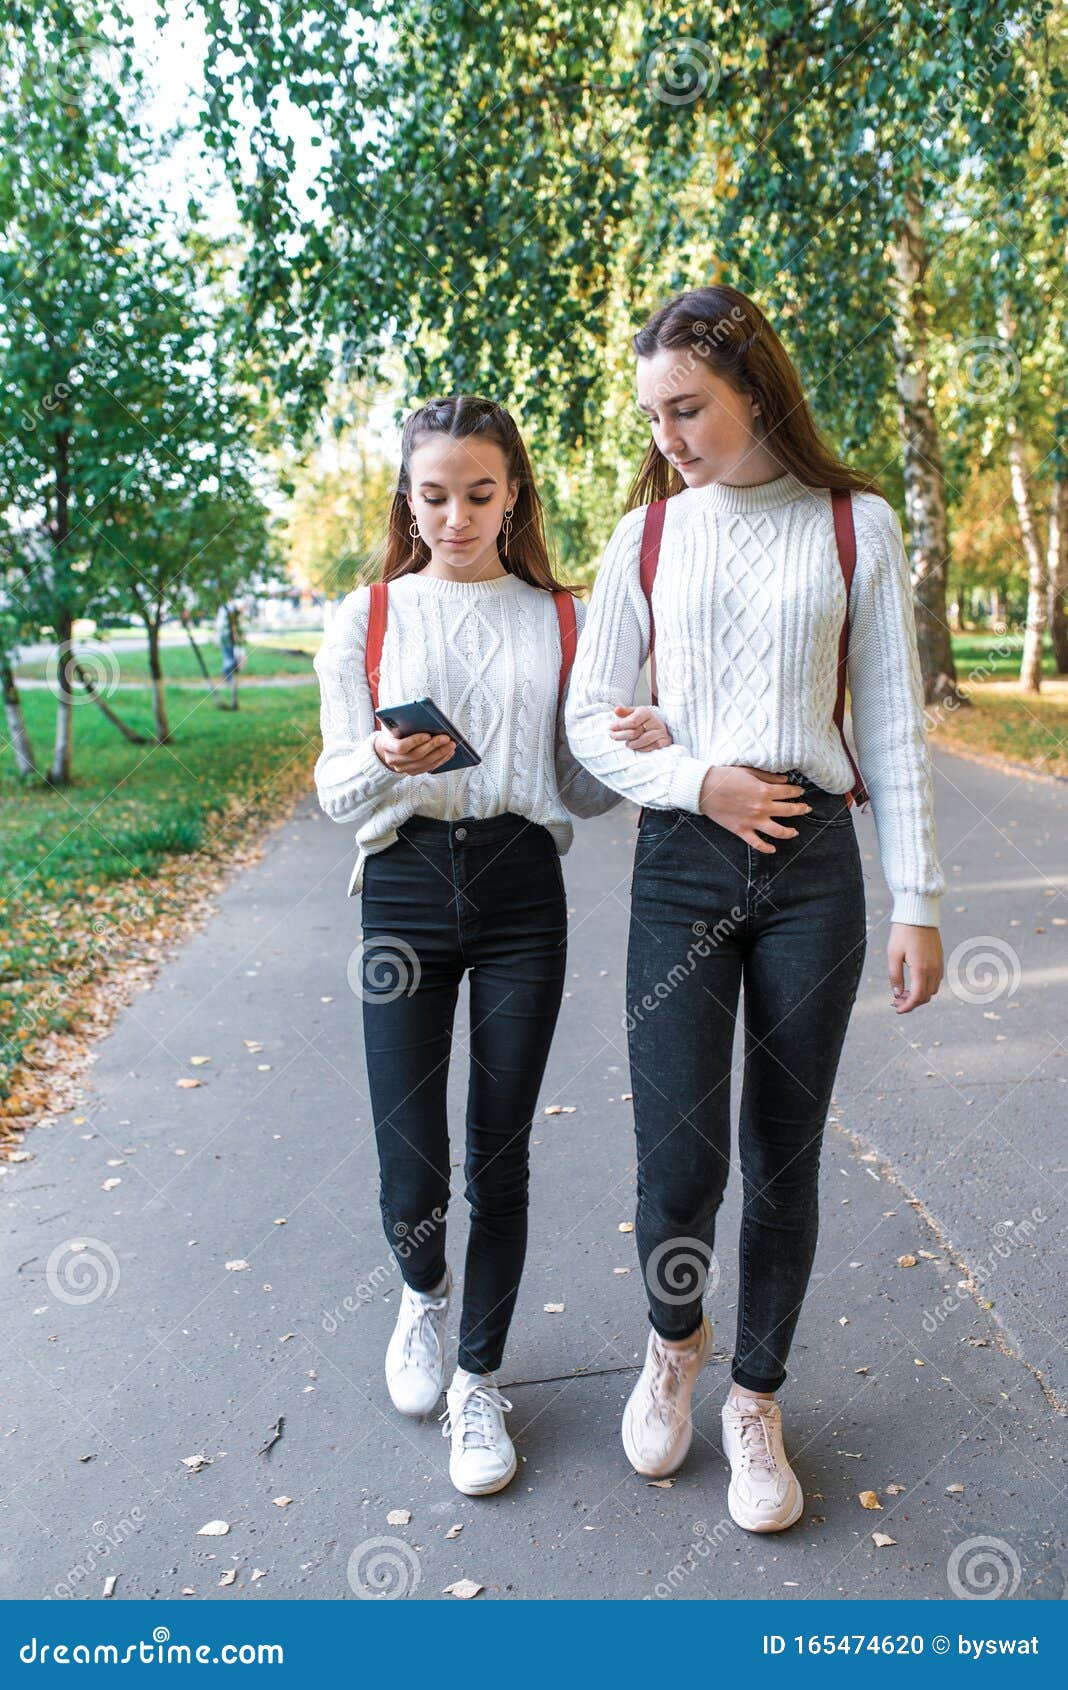 Two Girls Schoolgirl 12 15 Years Old Autumn Summer Day City Return Home On Road Hands Of 